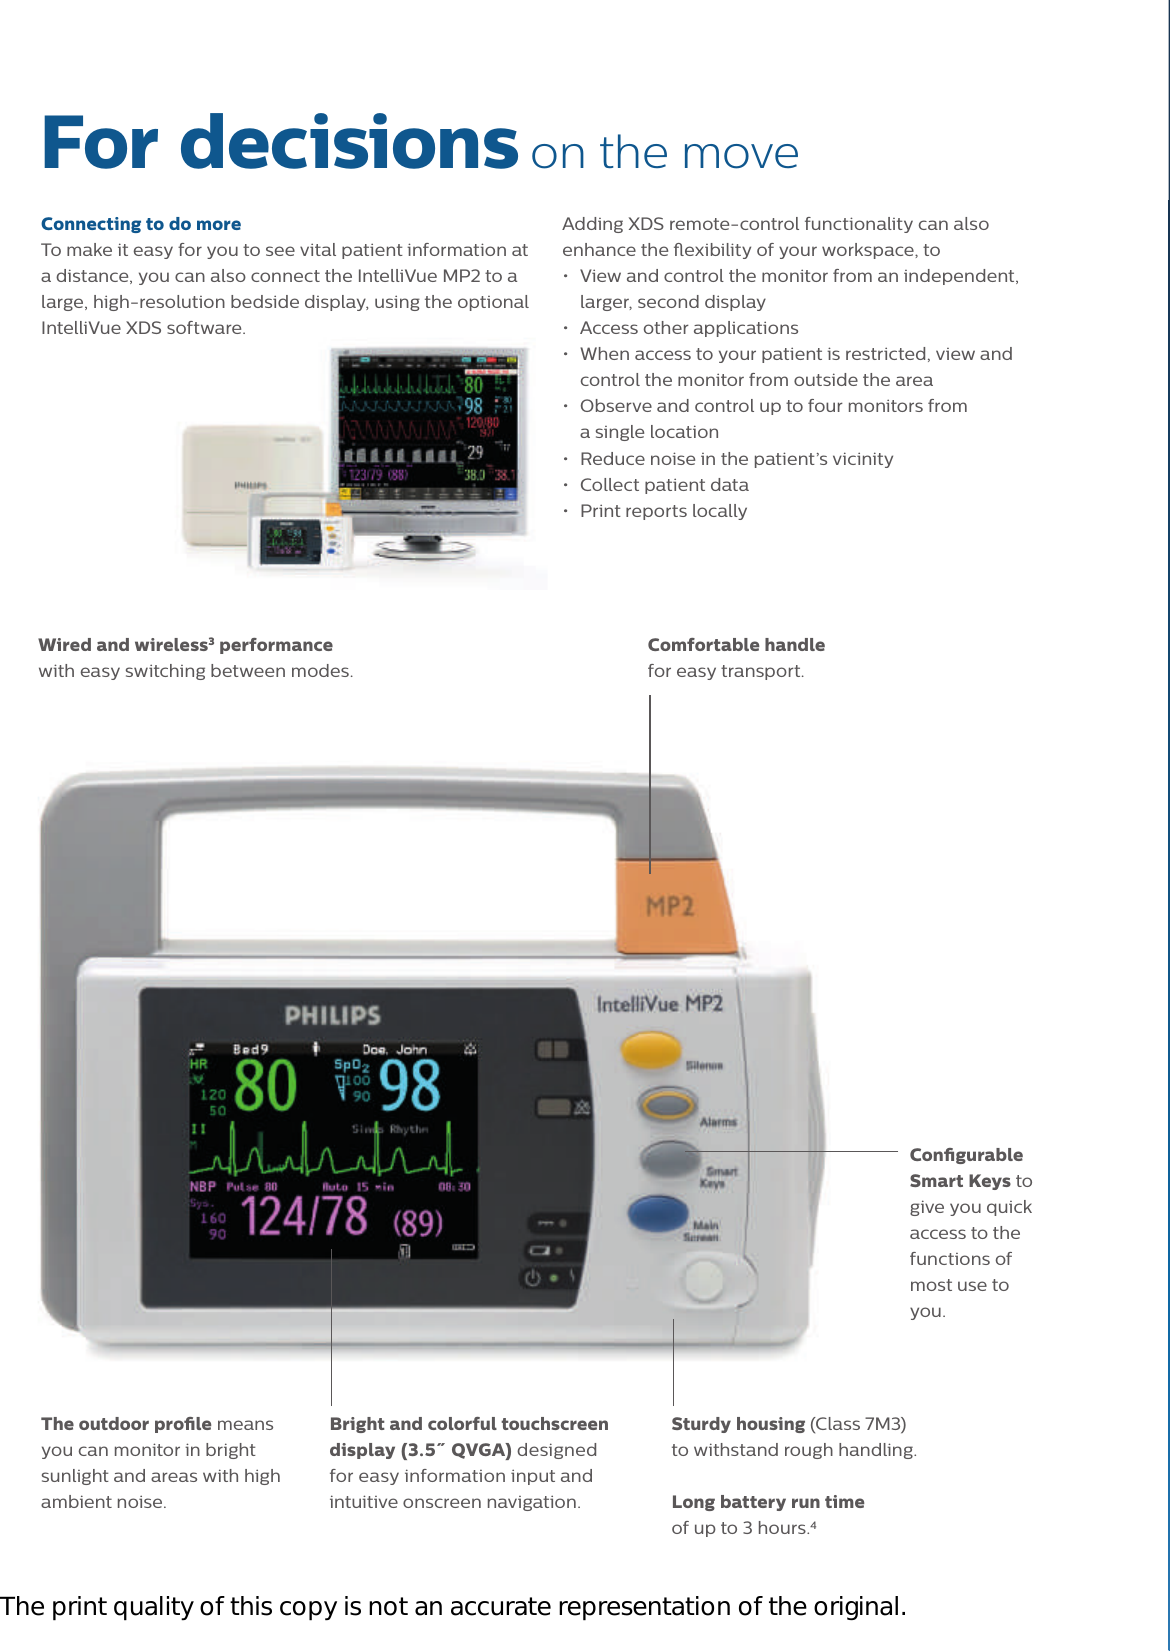 Page 3 of 6 - Philips 865040 452299109441 User Manual Product Brochure Intelli Vue Portable Patient Monitor MP2 Ffd03f79deaf4e43a5d8a77c014f1d93